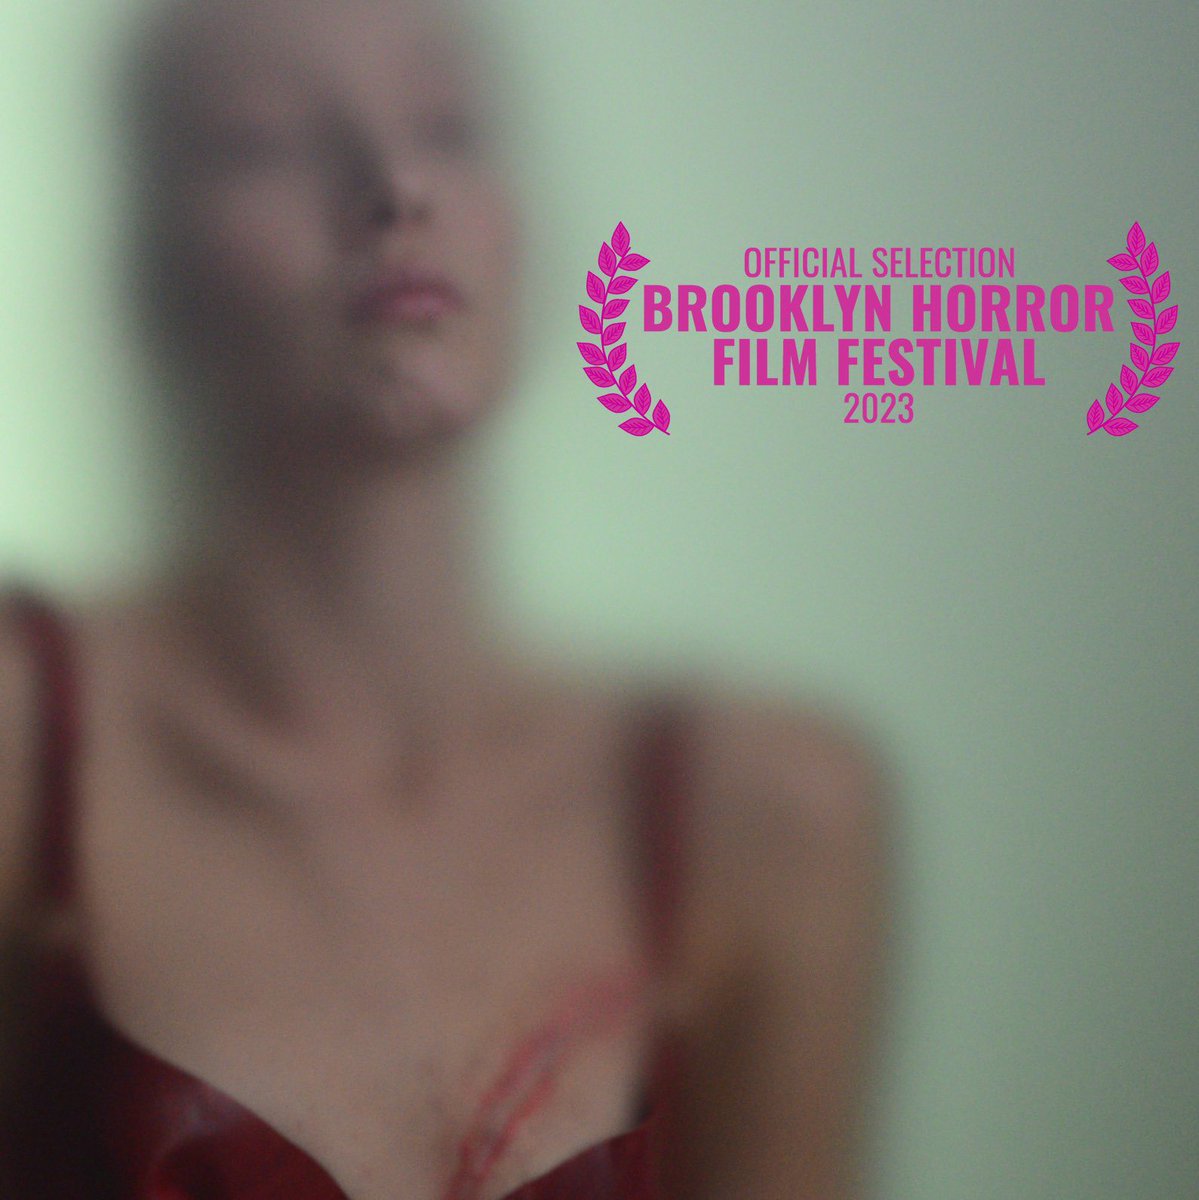 My short film All Your Women Things will get its New York premiere @BrooklynHorror Fest on October 14. Thrilled to have a local showing alongside some very exciting filmmakers :) brooklynhorror2023.eventive.org/films/64fcb8b6…